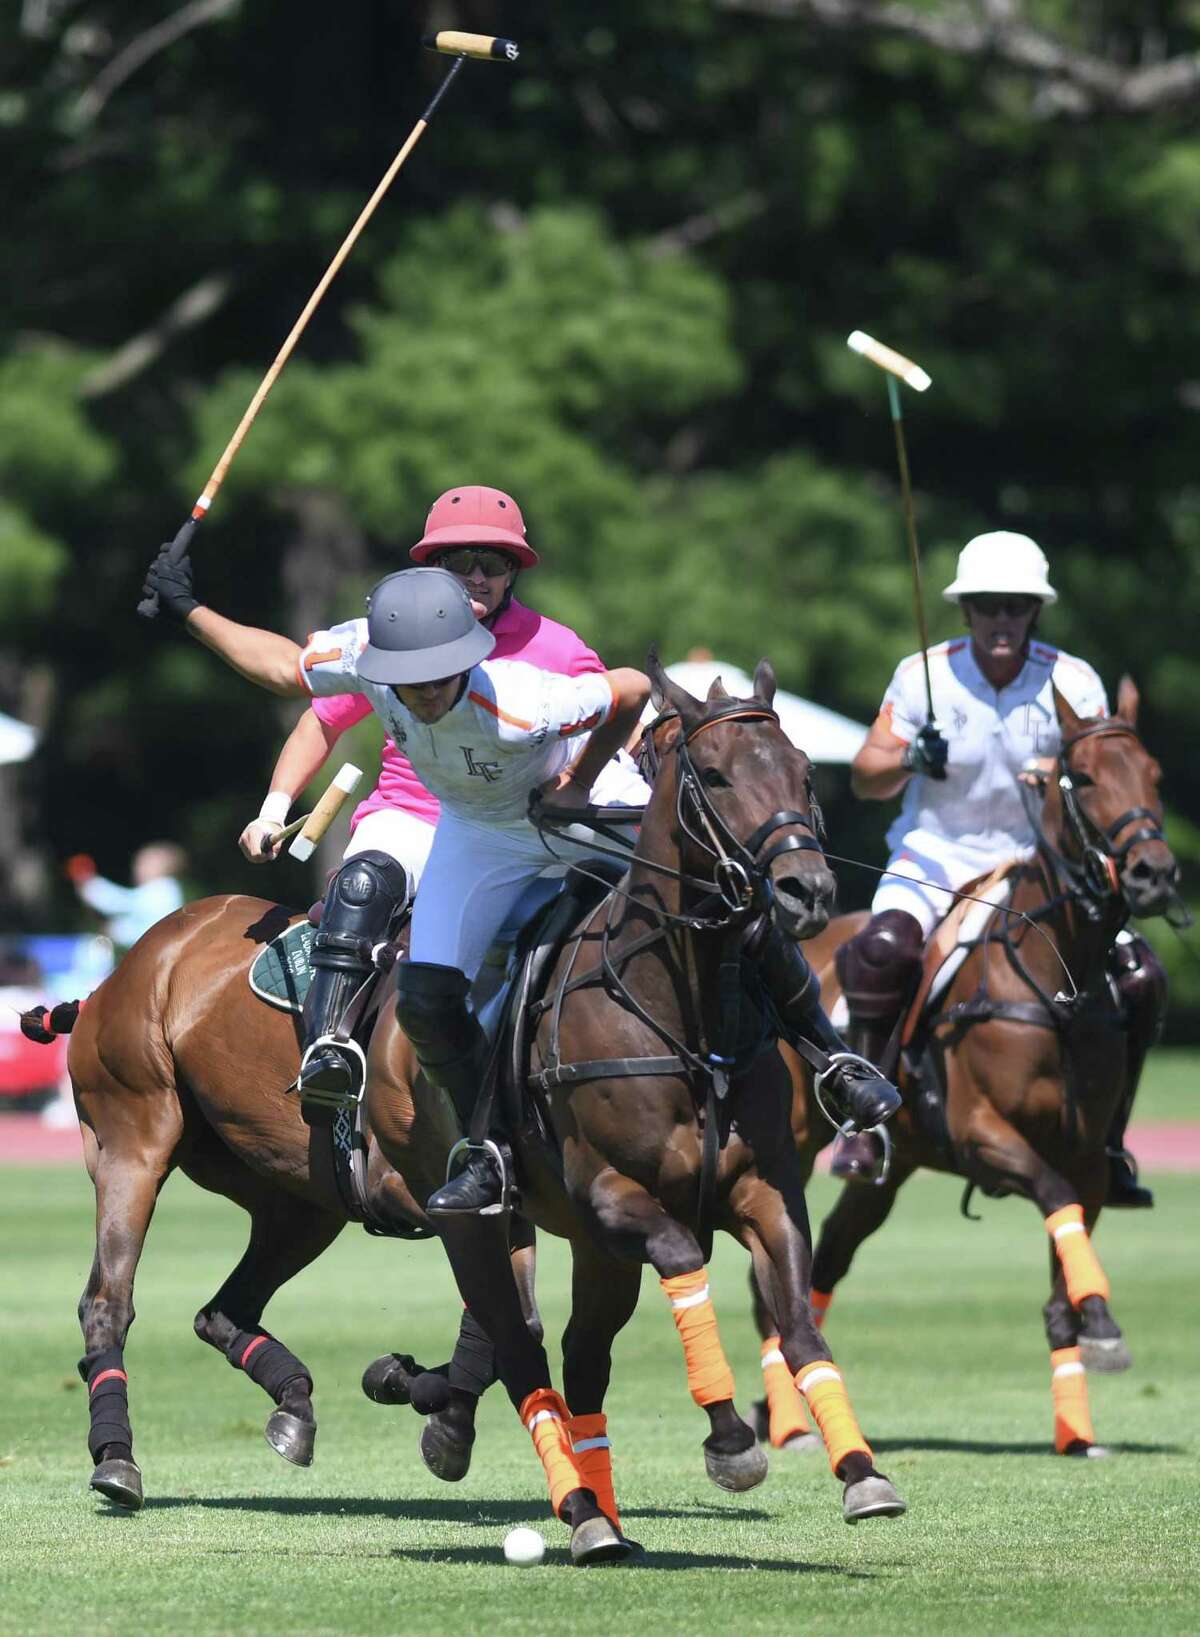 La Fe's Louis Devaleix controls posession of the ball in the East Coast Bronze Cup finals between Level Select CBD and La Fe at the Greenwich Polo Club in Greenwich, Conn. Sunday, June 19, 2022.